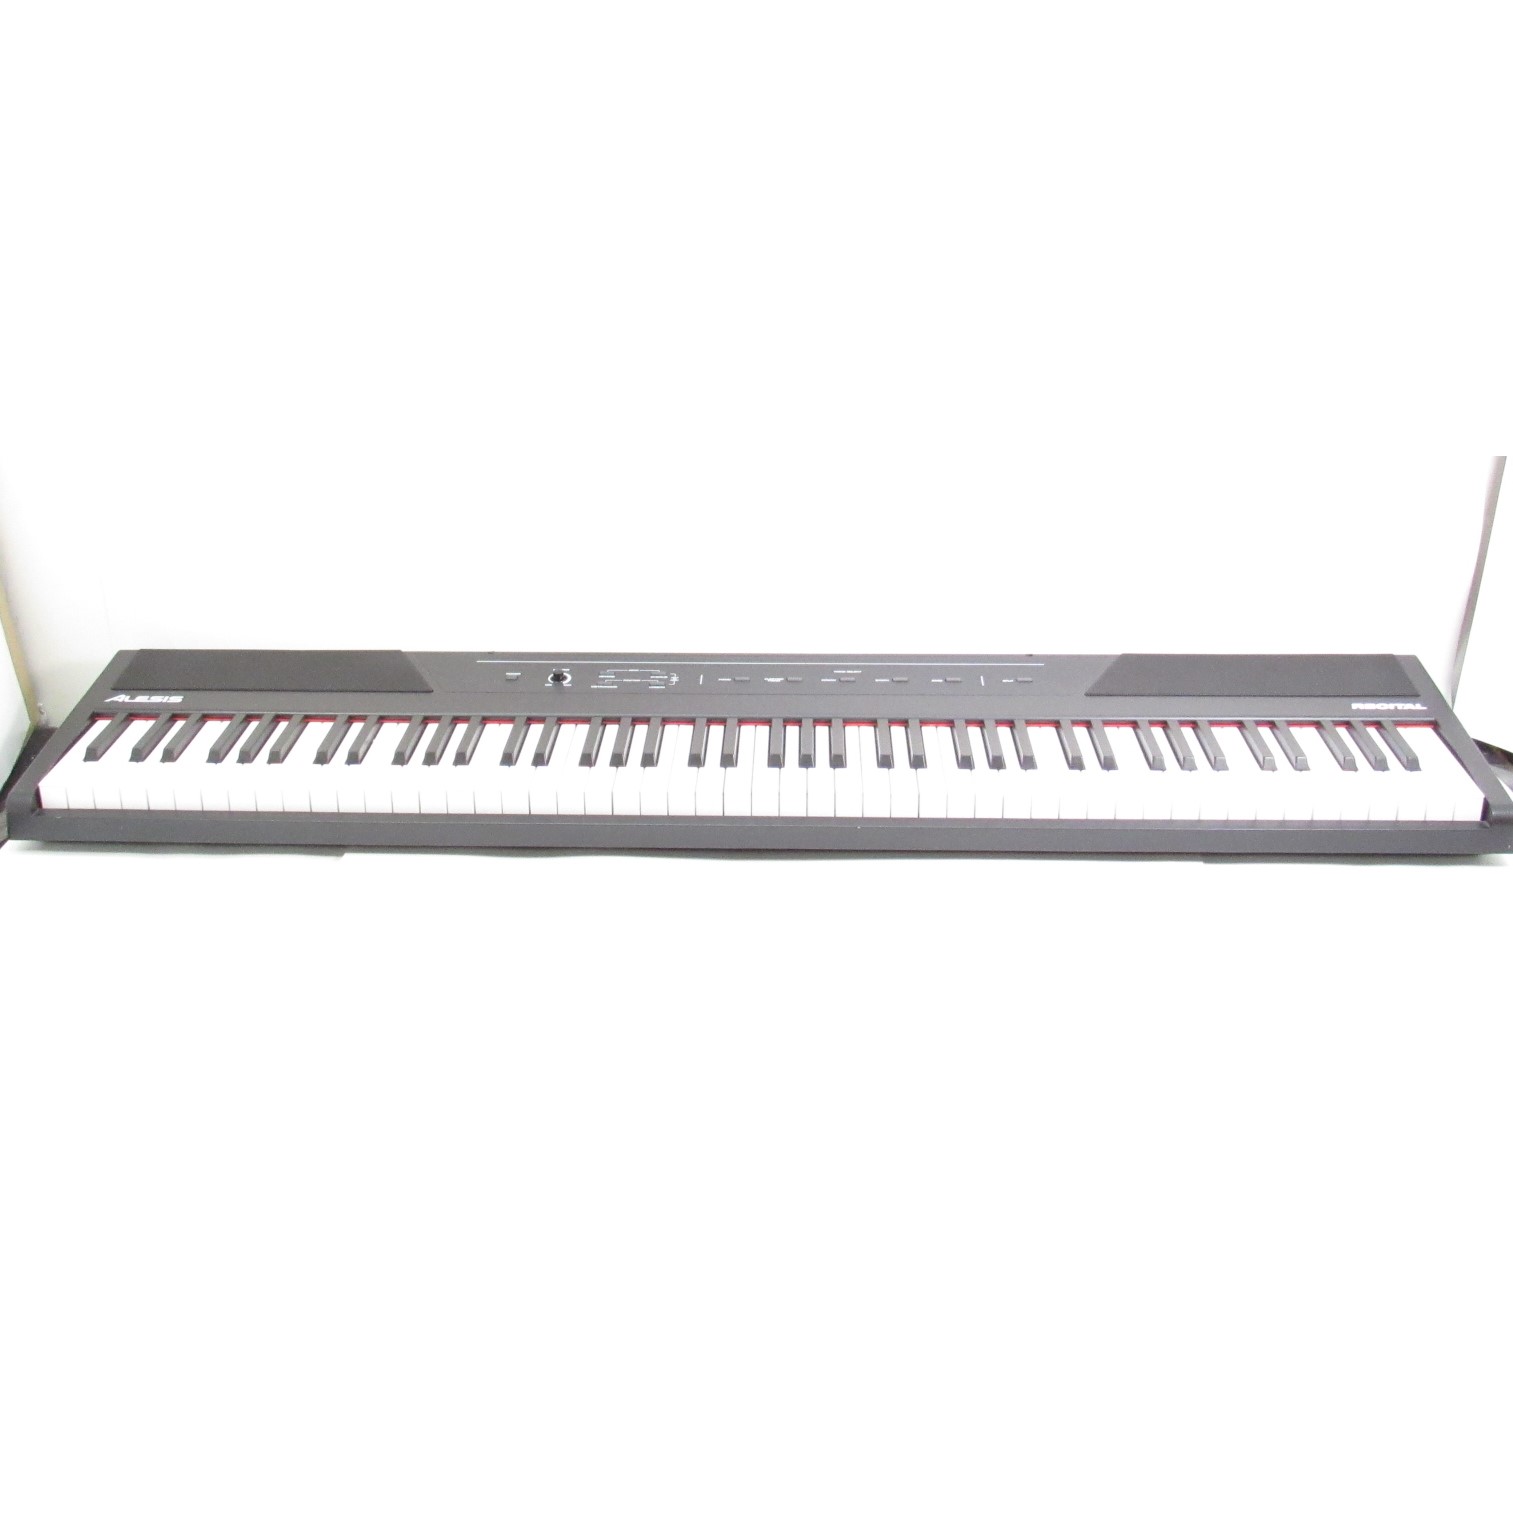 Alesis MELODY61 MKII Portable Keyboard -61 Key- Tested - Local Pick Up Only